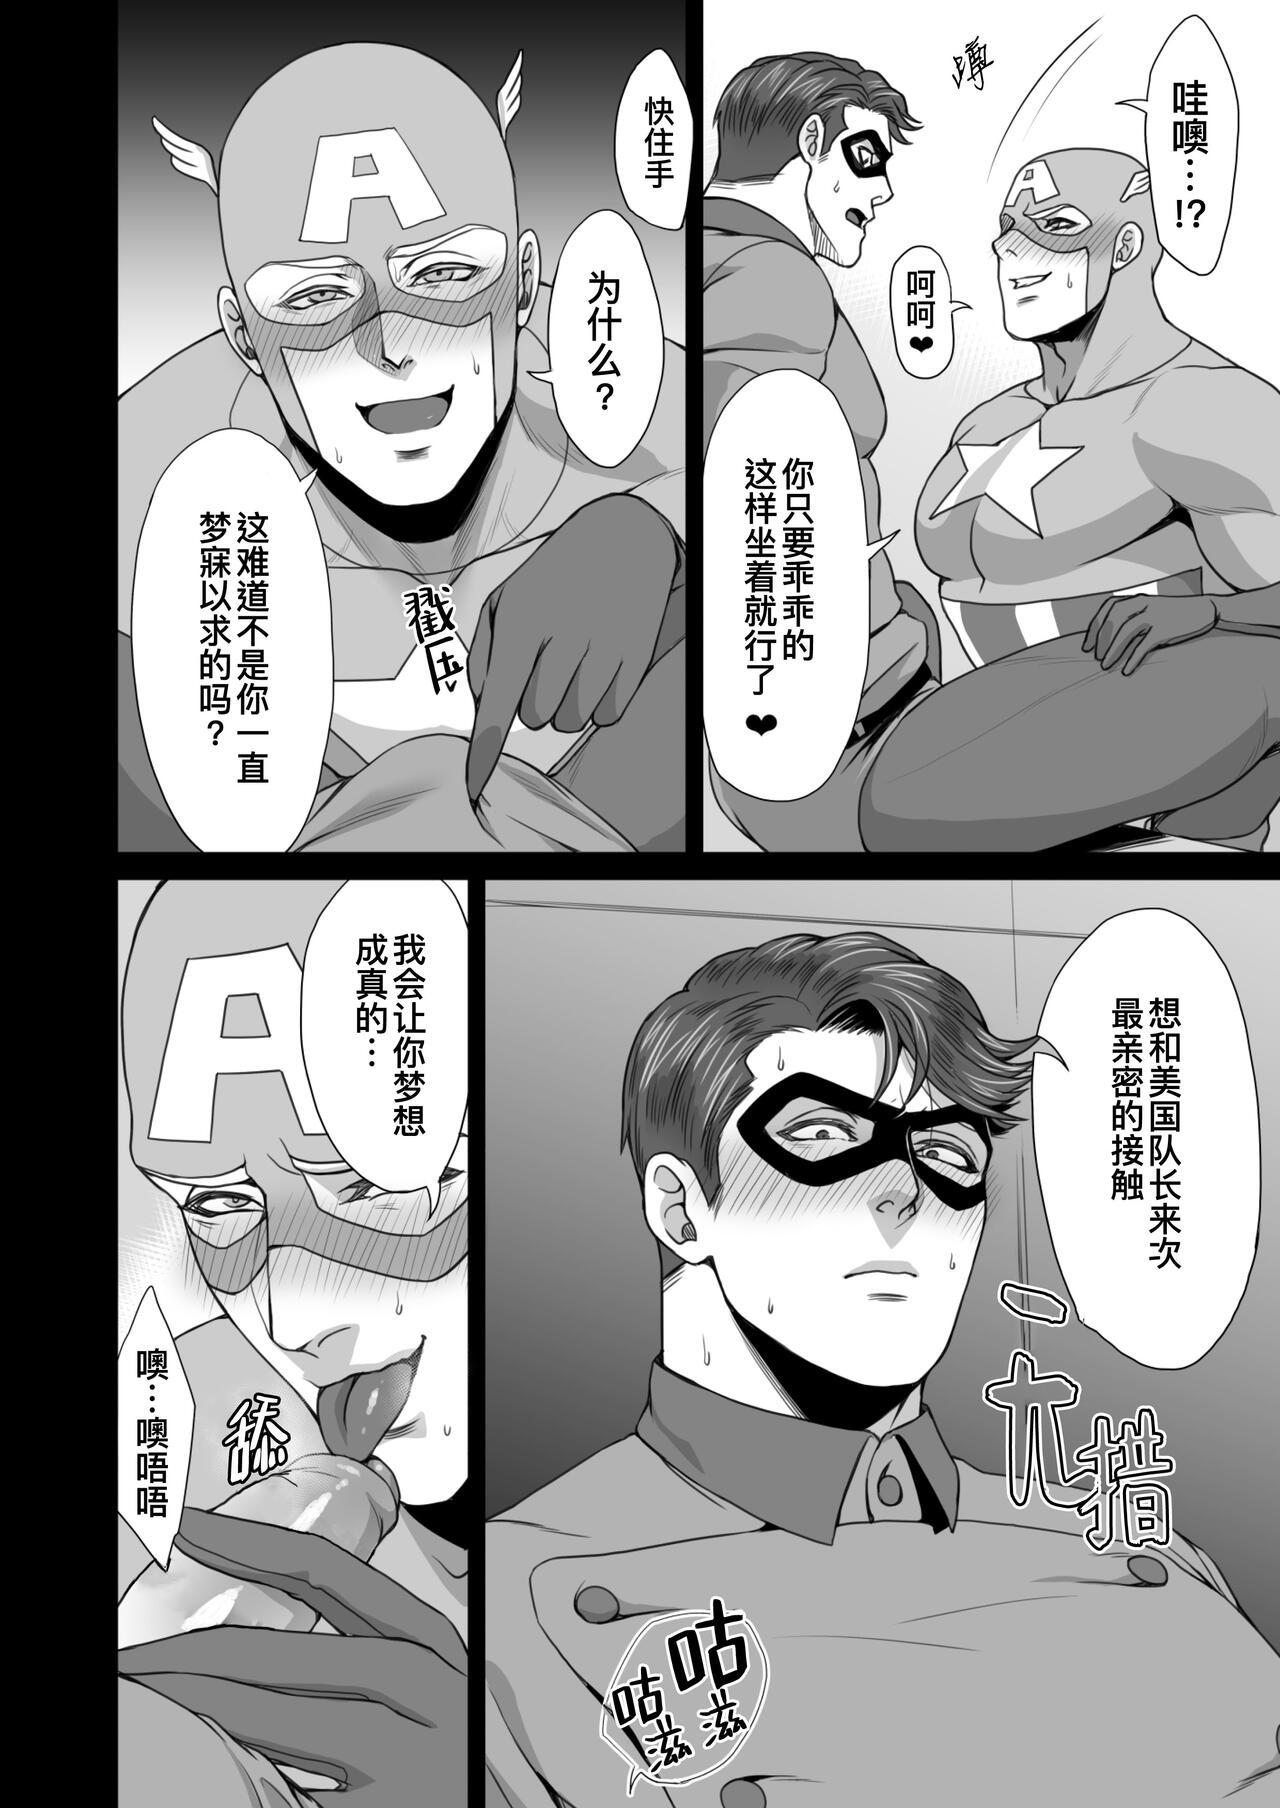 American NO HEROES Our love and hate relationship | 不再需要英雄 - 关于我们之间的爱恨情仇 - Avengers Fake Tits - Page 8